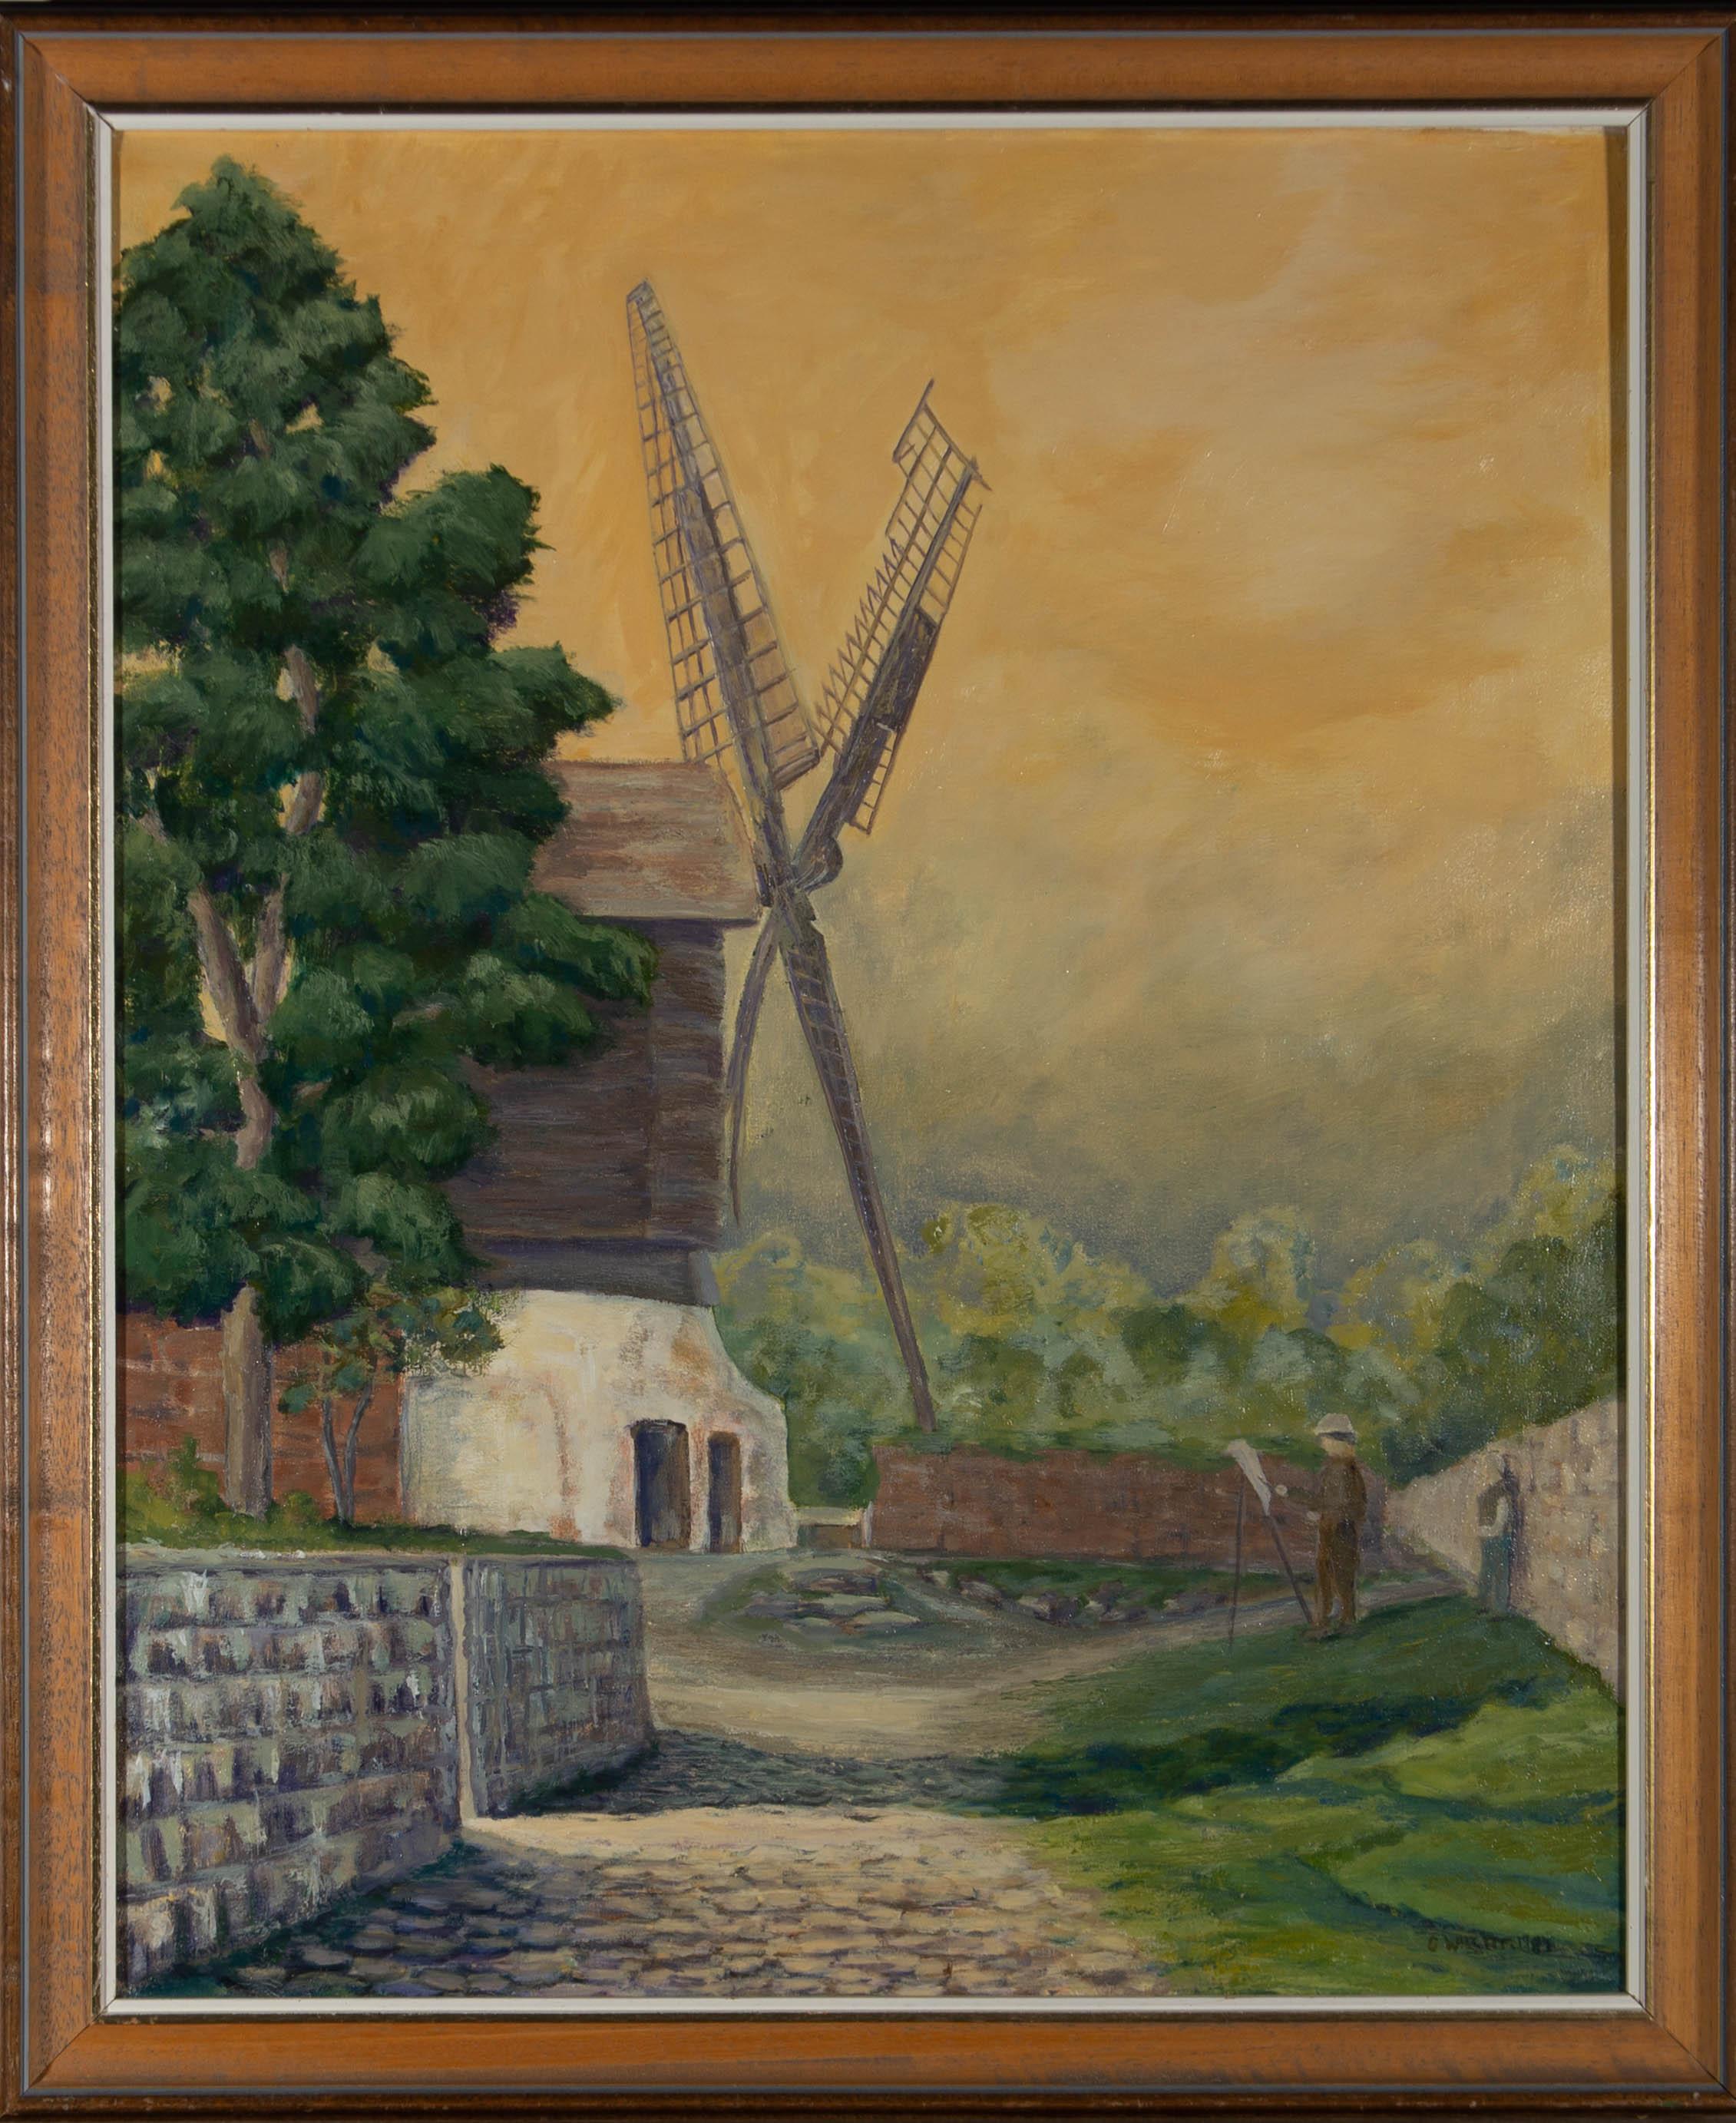 A landscape depicting Wavertree Mill in Liverpool. A figure stands painting to the right of the composition, possibly a self-portrait by the artist. Presented in a wooden frame with a gold and white inner edge. Signed and dated to the lower-right